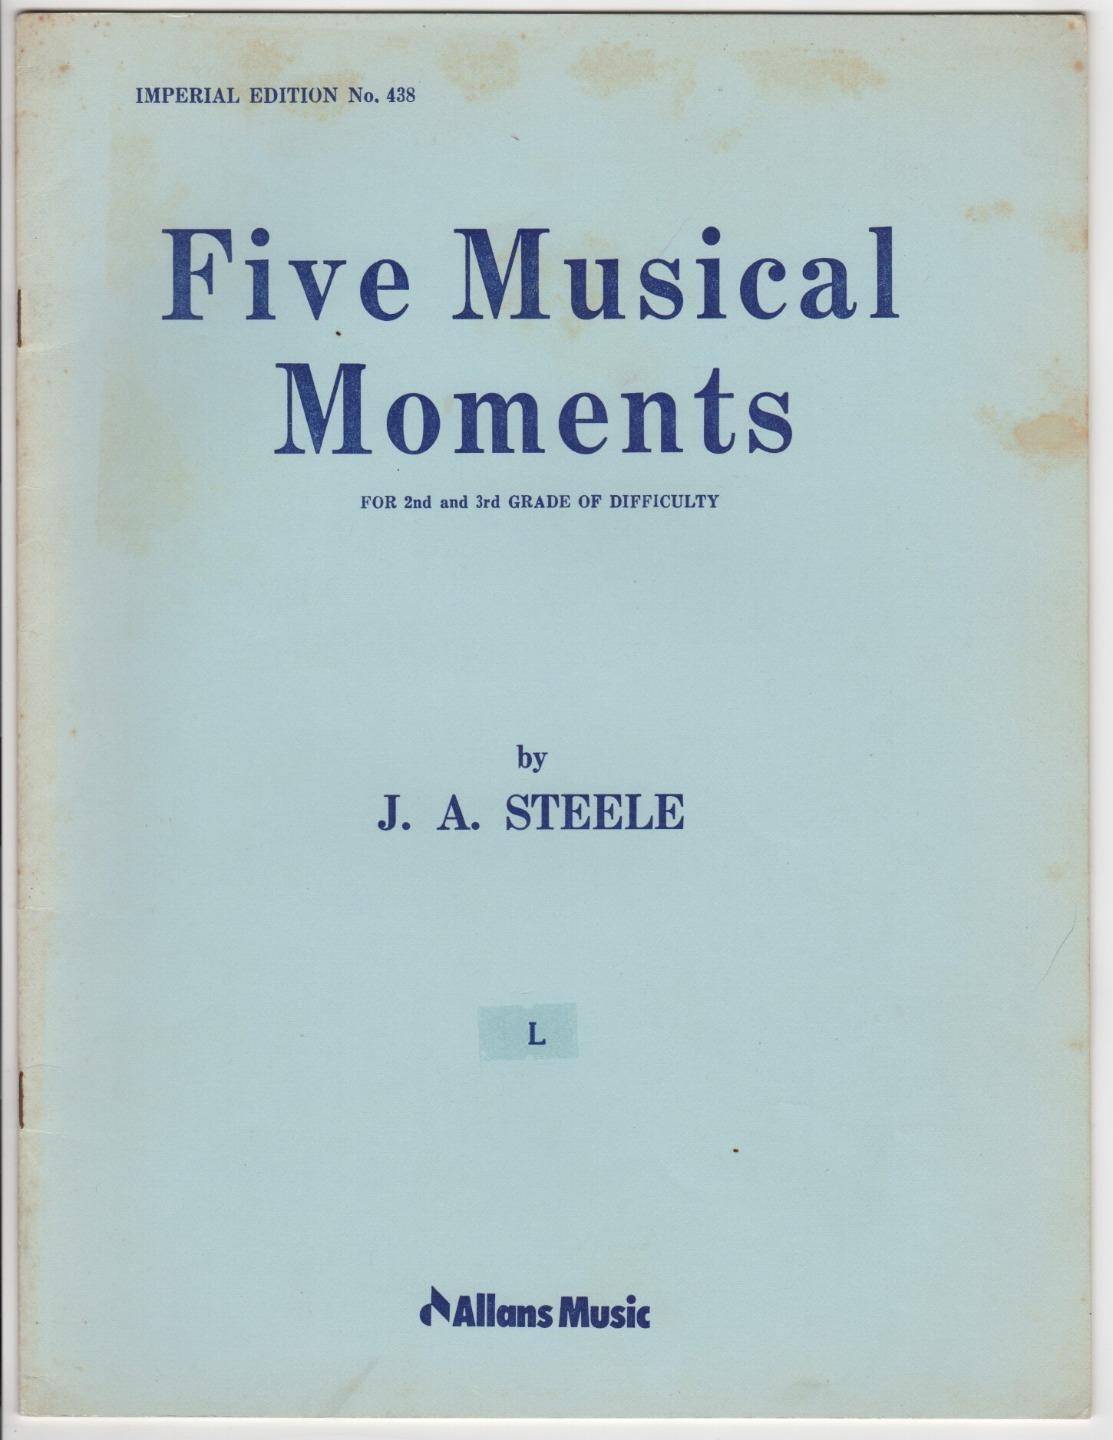 Vintage FIVE MUSICAL MOMENTS Piano Sheet Music Book, J.A. STEELE, Grades 2 & 3